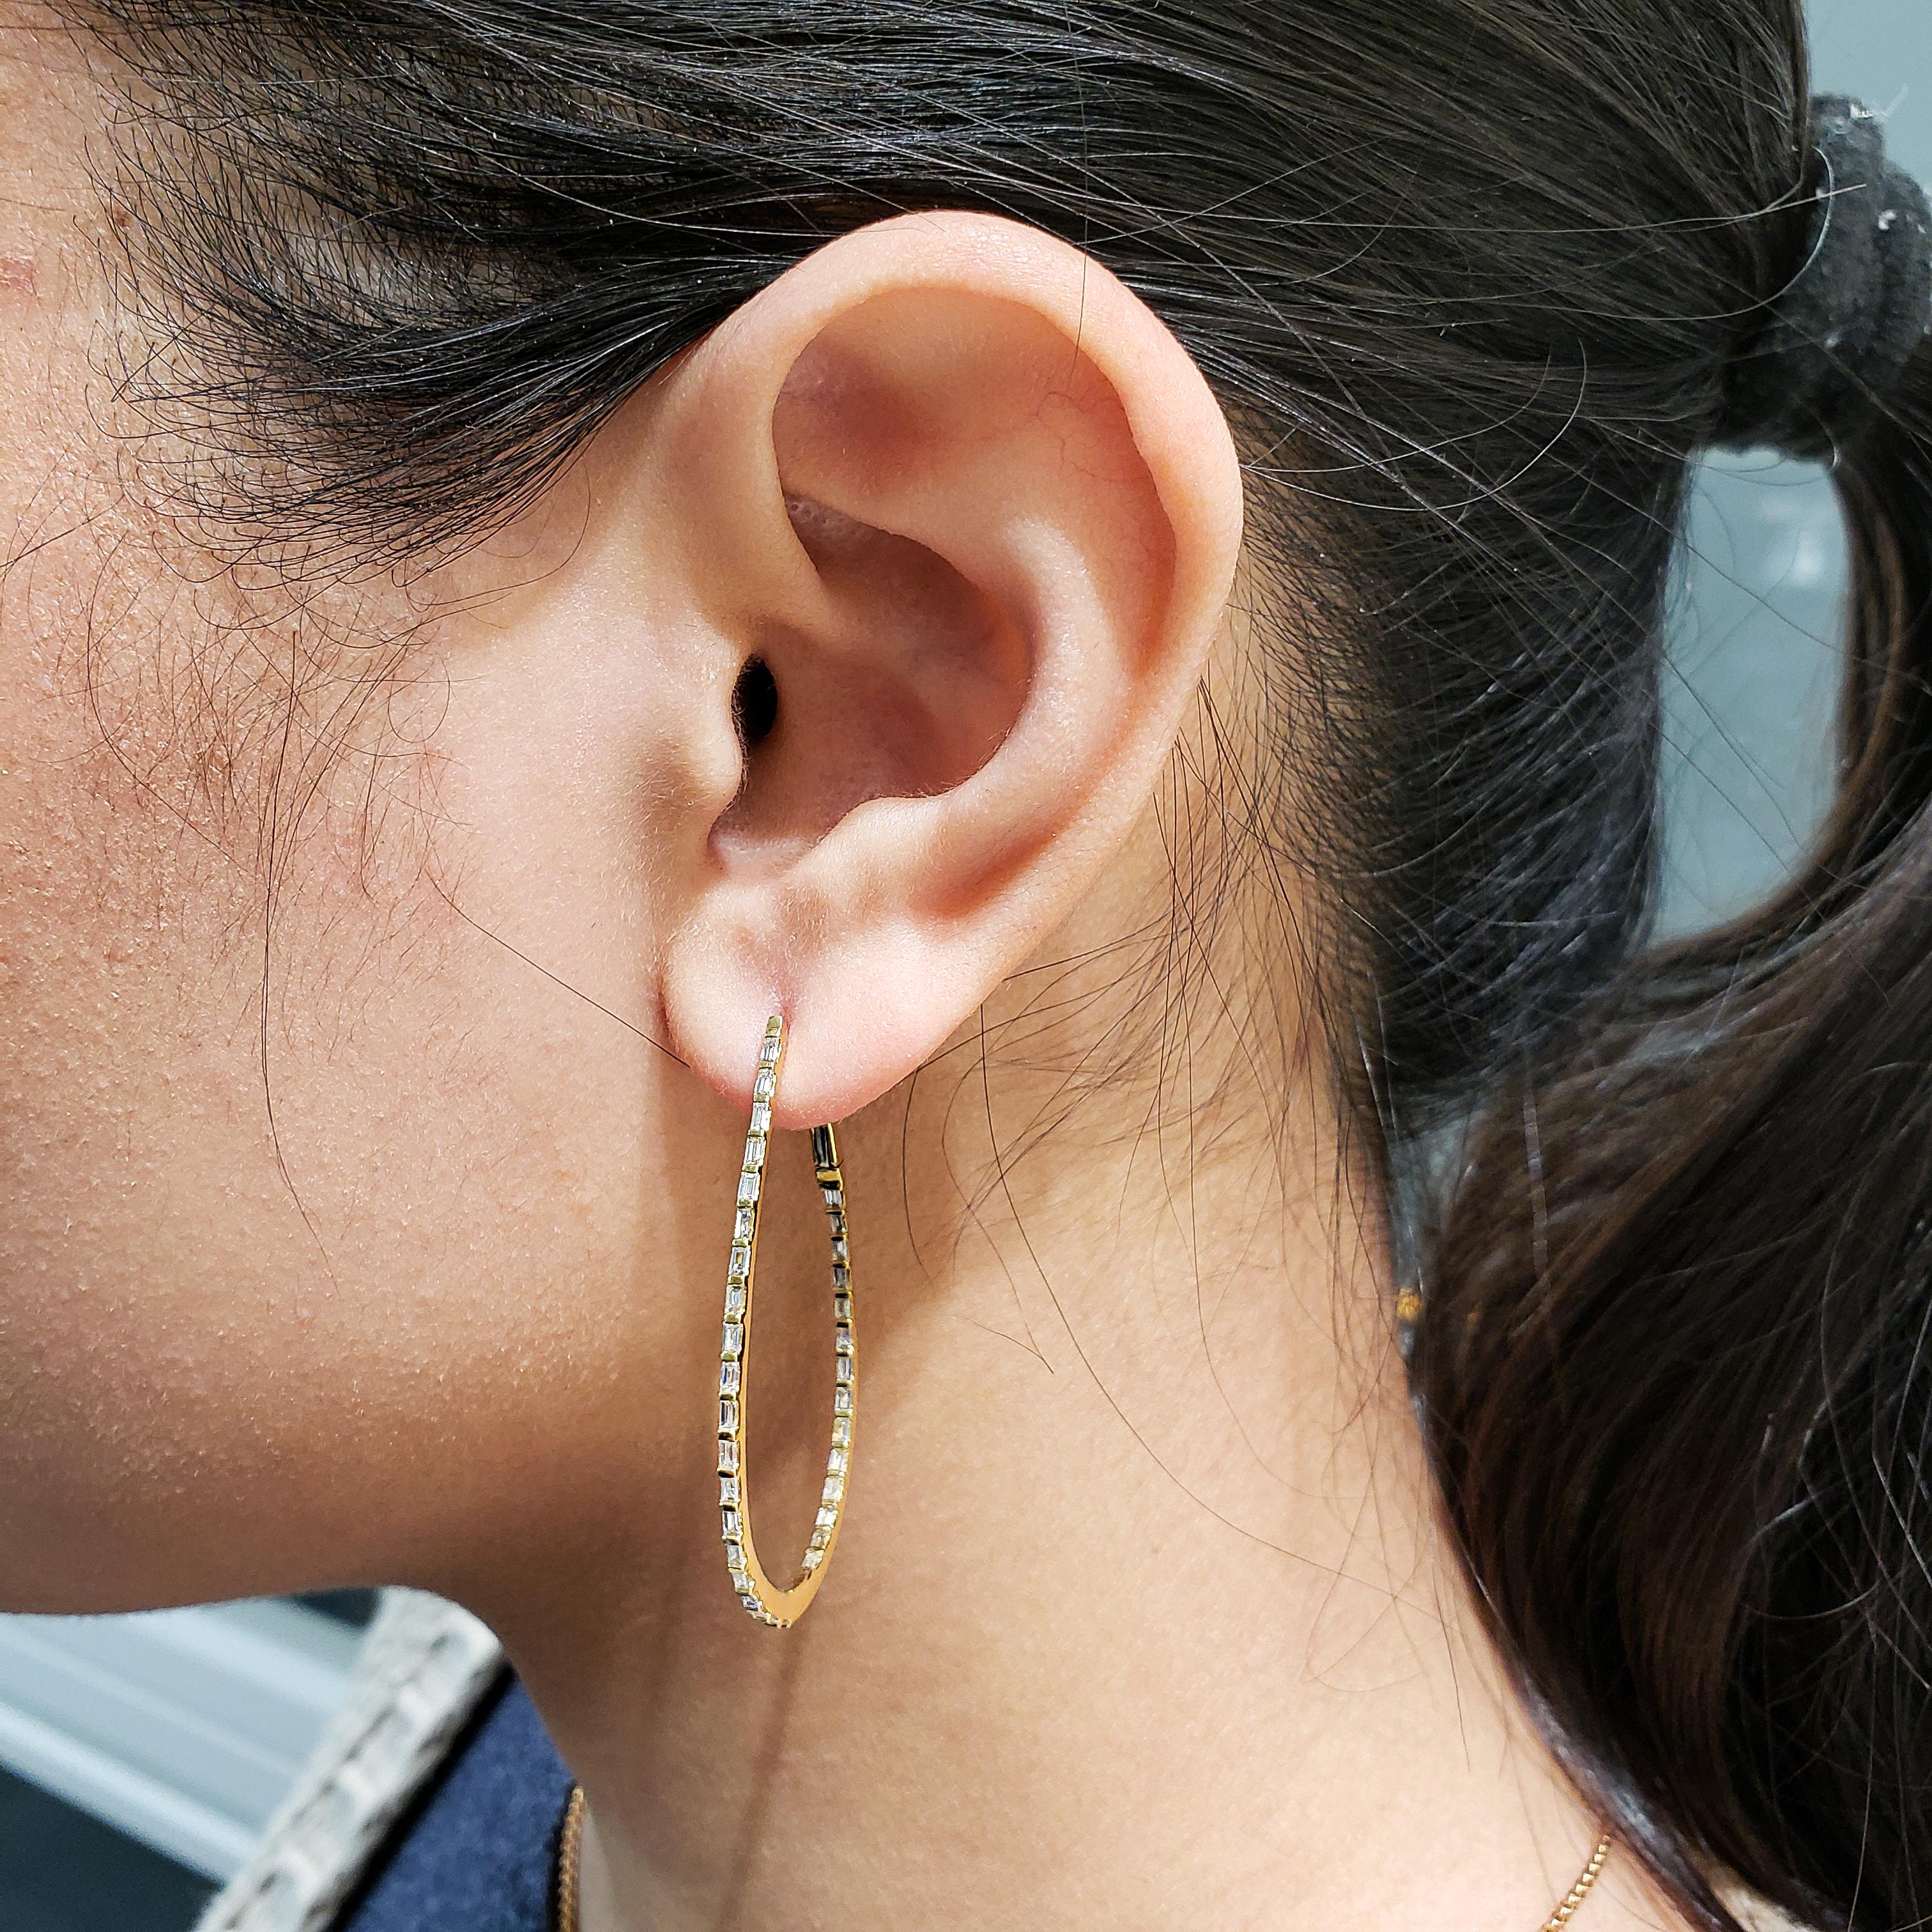 A unique and stylish pair of hoop earrings showcasing a row of baguette diamonds, Bar set in a tear drop hoop design. Diamonds weigh 0.98 carats total. Made in 18 karat yellow gold.

Style available in different price ranges. Prices are based on